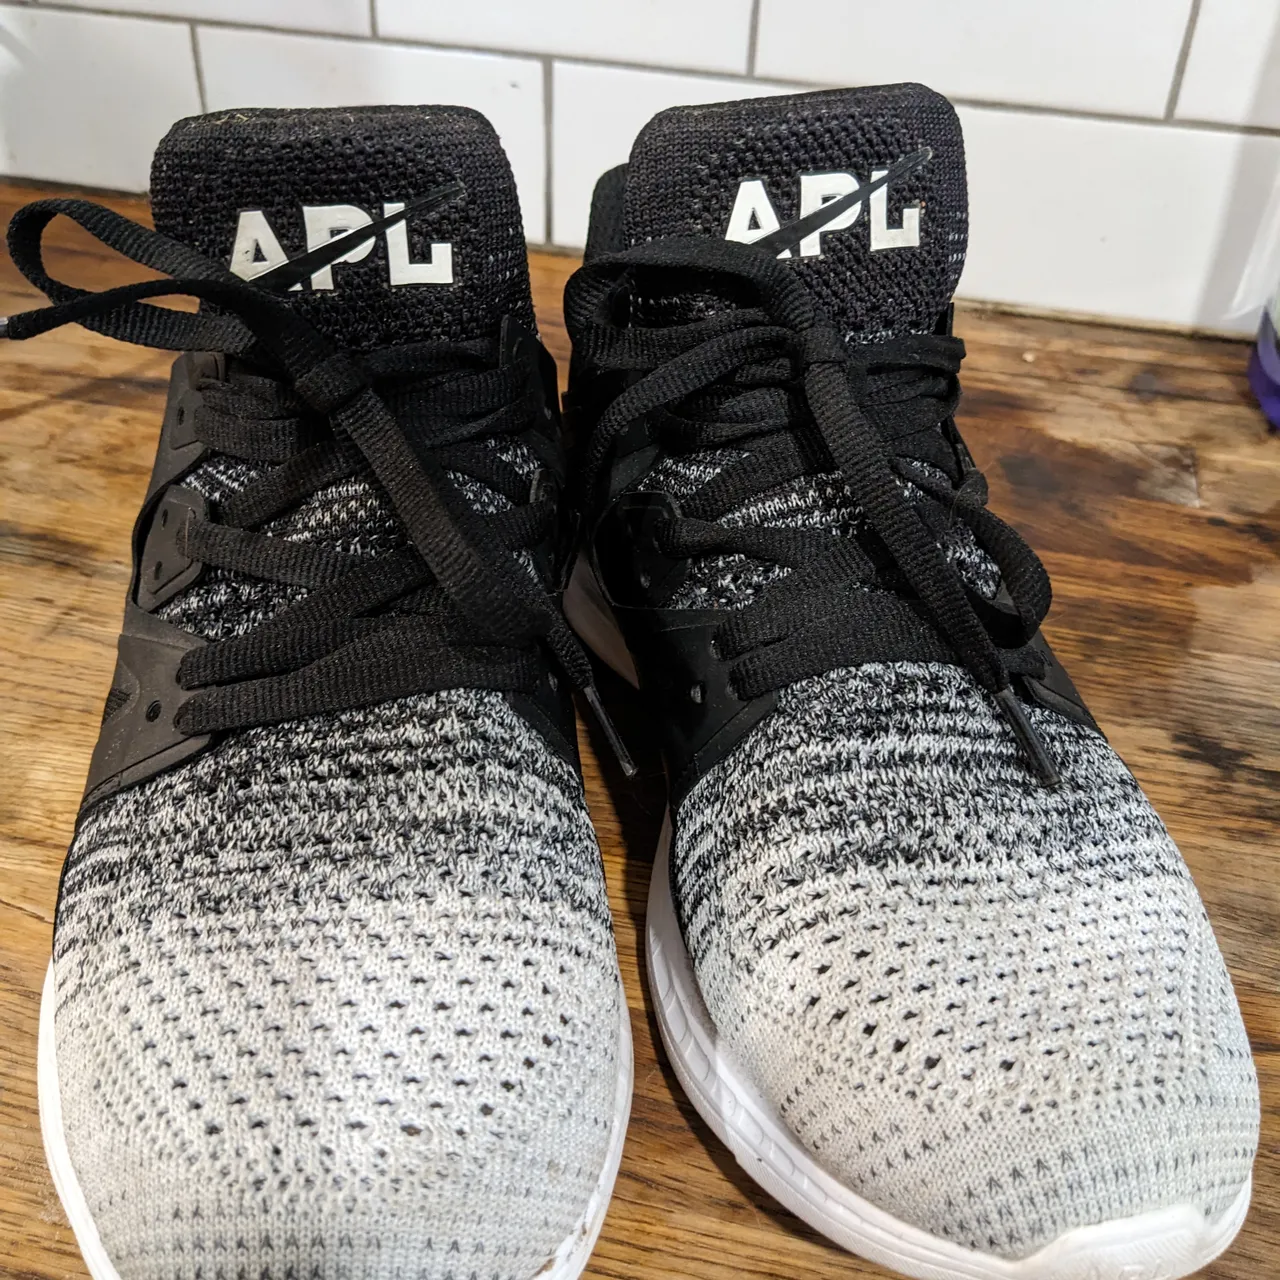 APL sneakers size 9 photo 1